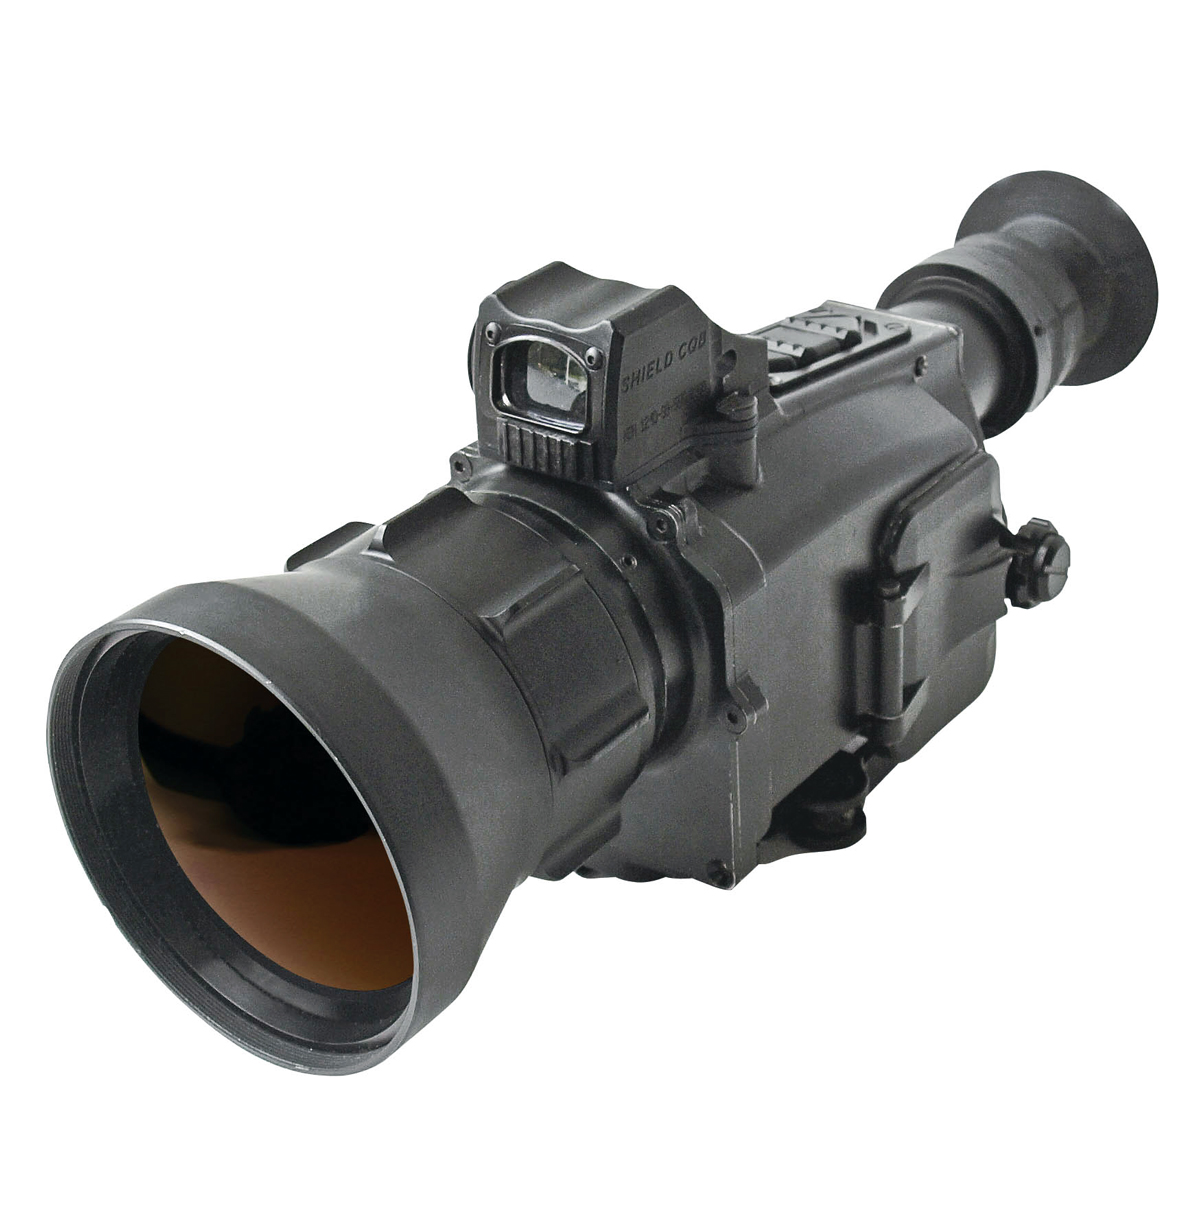 DRAGON-LR Long-Range Uncooled Thermal Weapon Sight